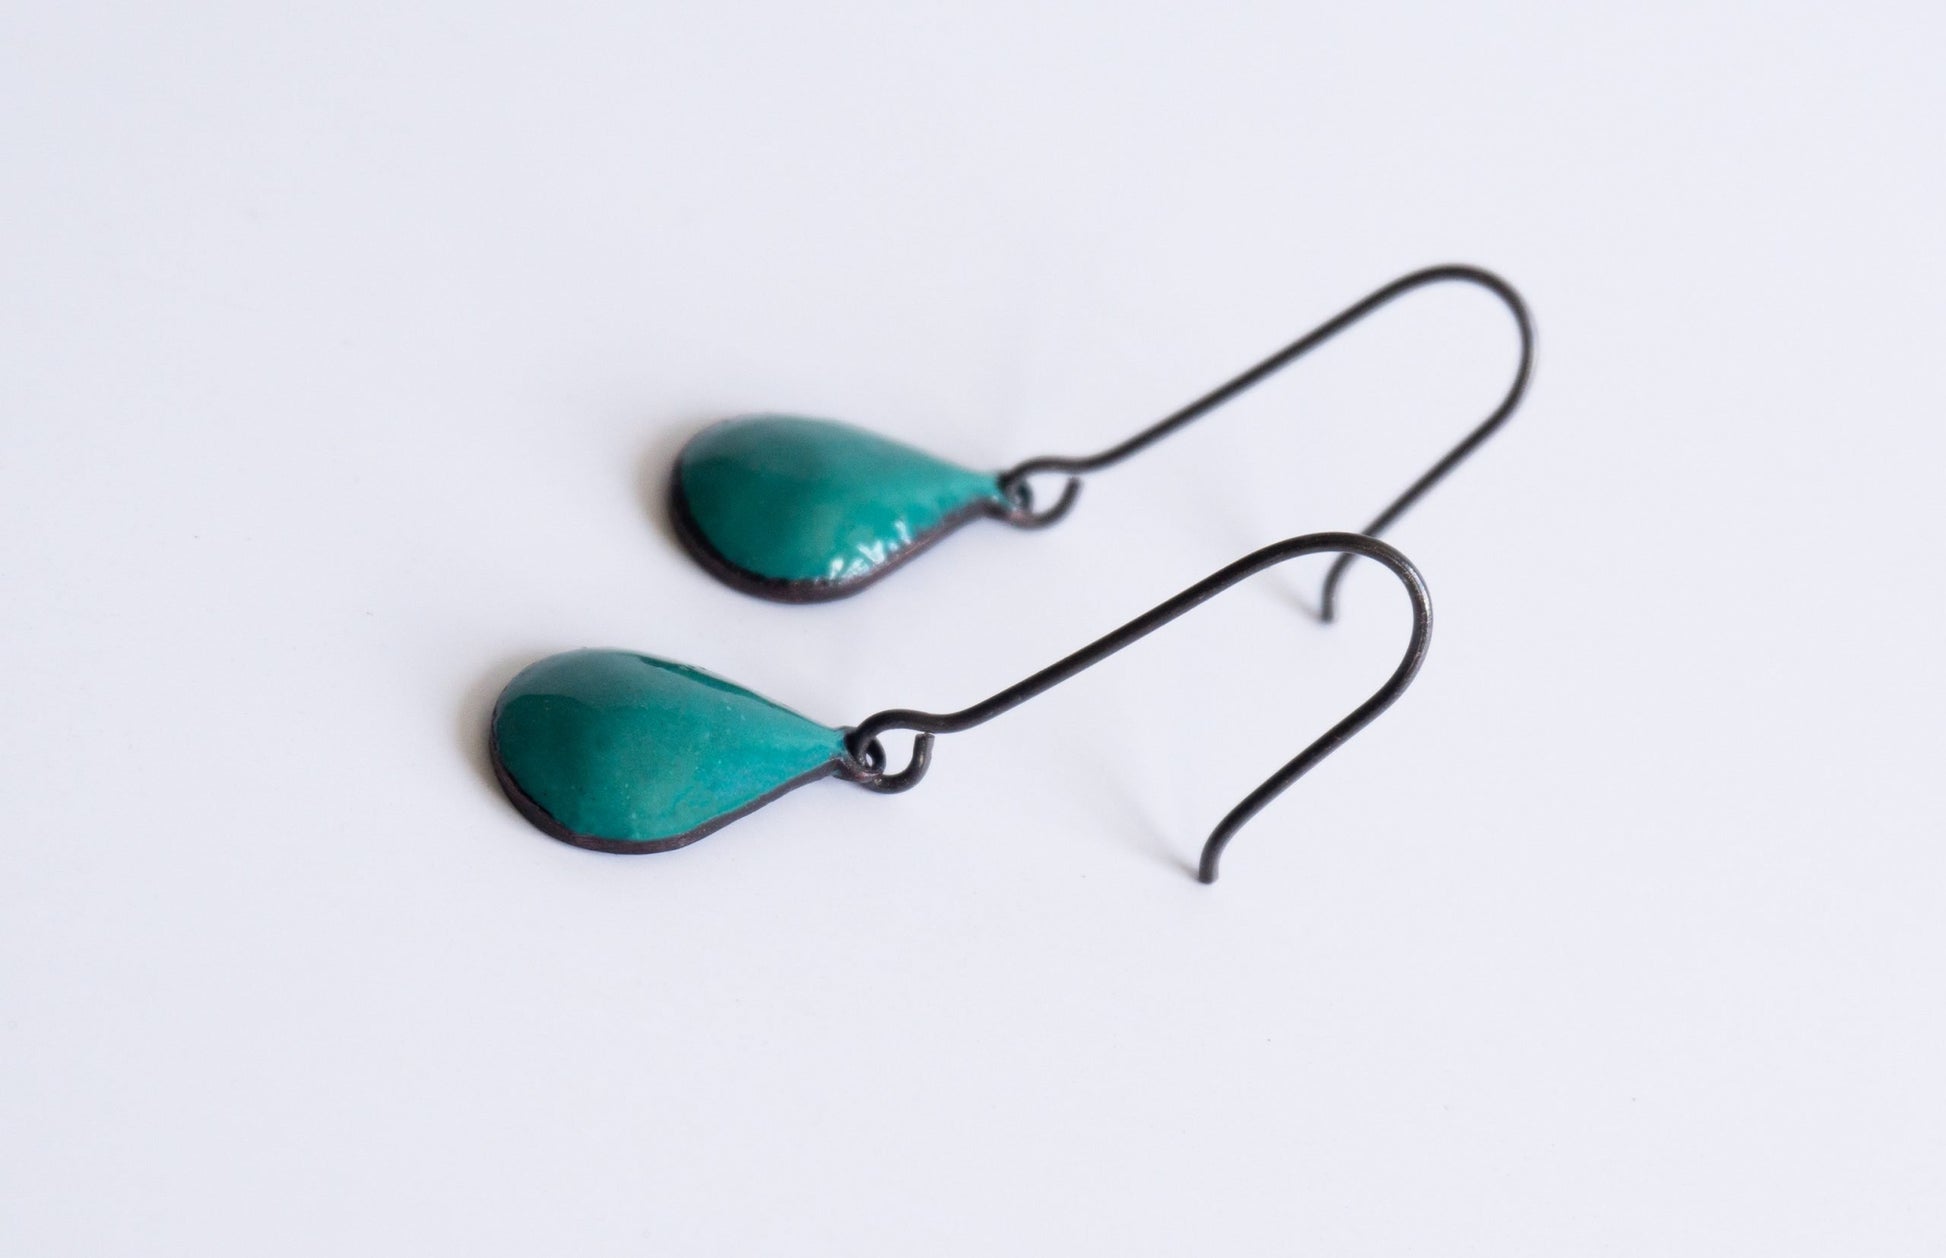 blackened silver ear wires with blue-green raindrops